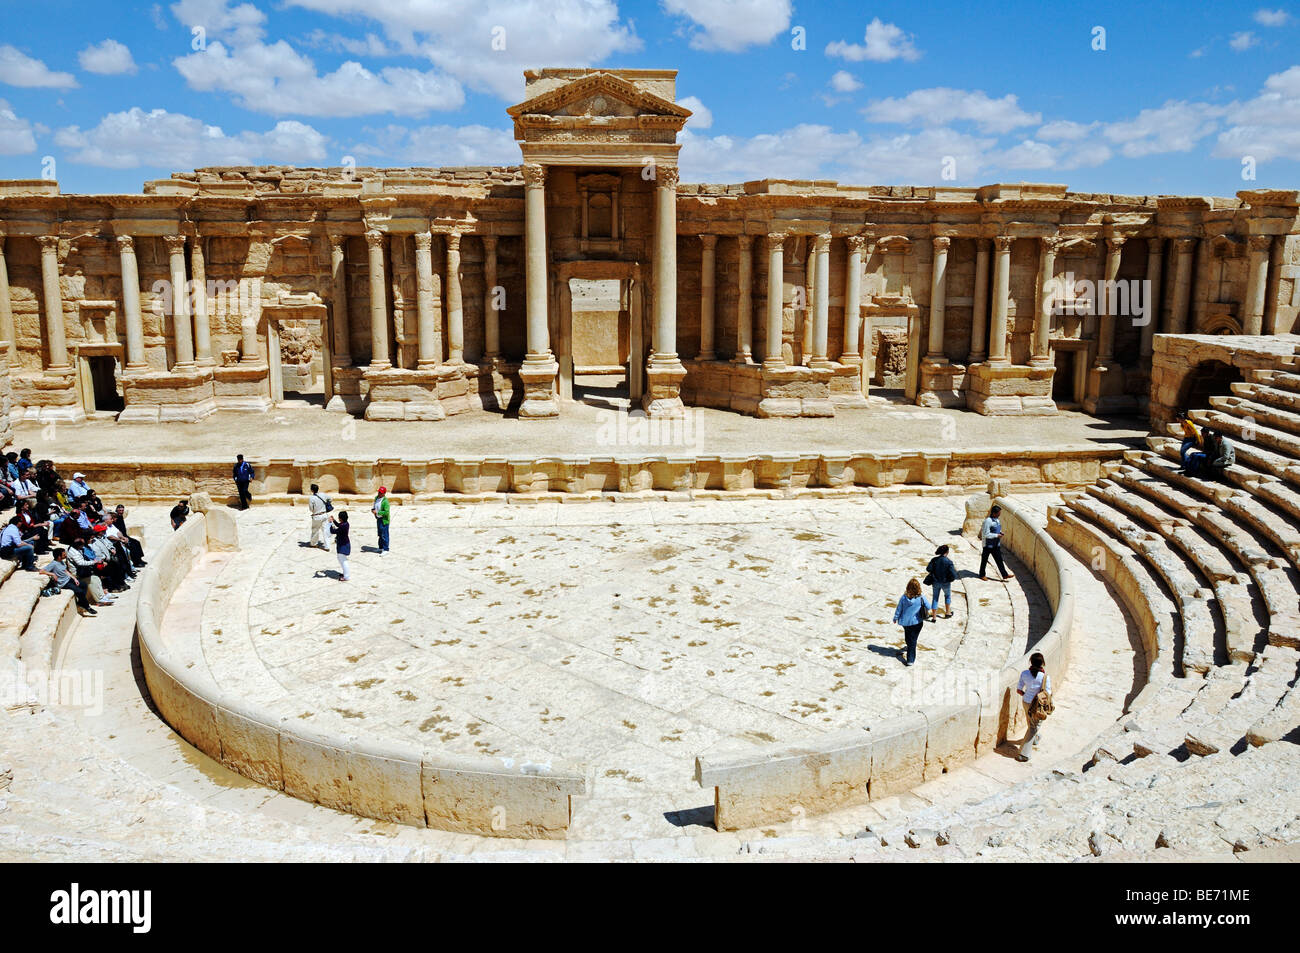 Theater in the ruins of the Palmyra archeological site, Tadmur, Syria, Asia Stock Photo